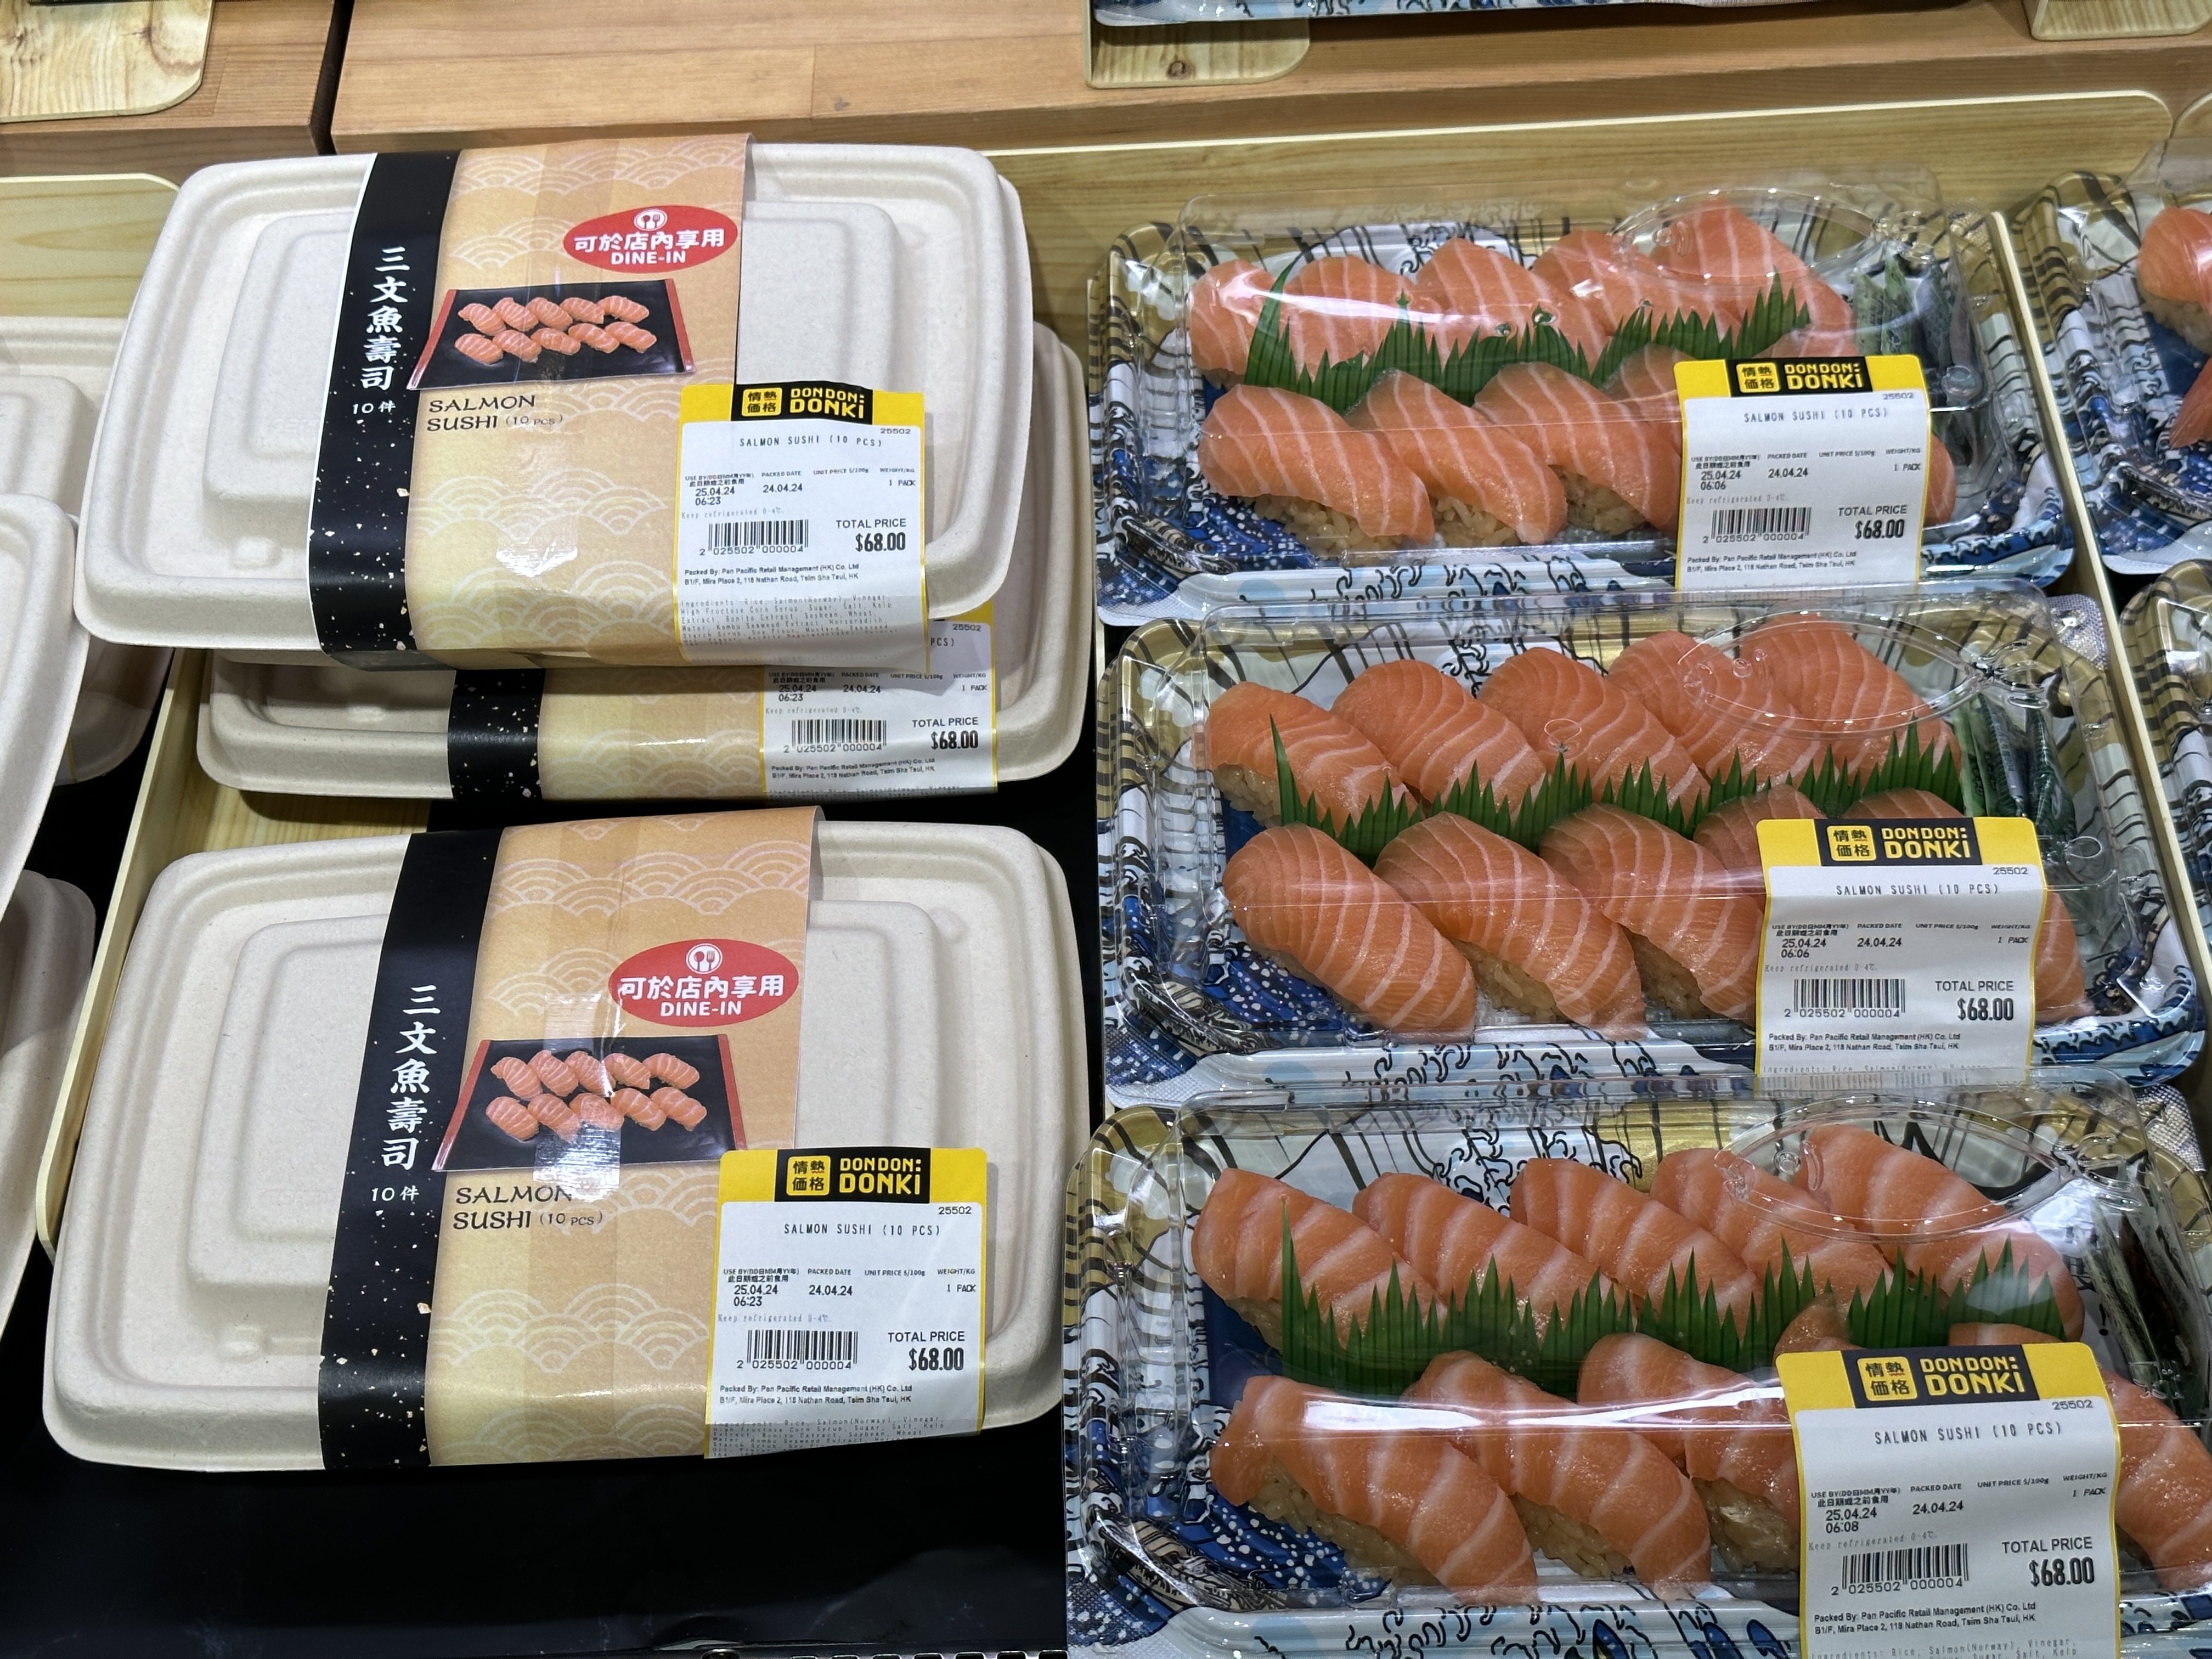 Cardboard sushi boxes for dine in customers sit alongside the usual see-through plastic containers at Don Don Donki. Photo: Jelly Tse